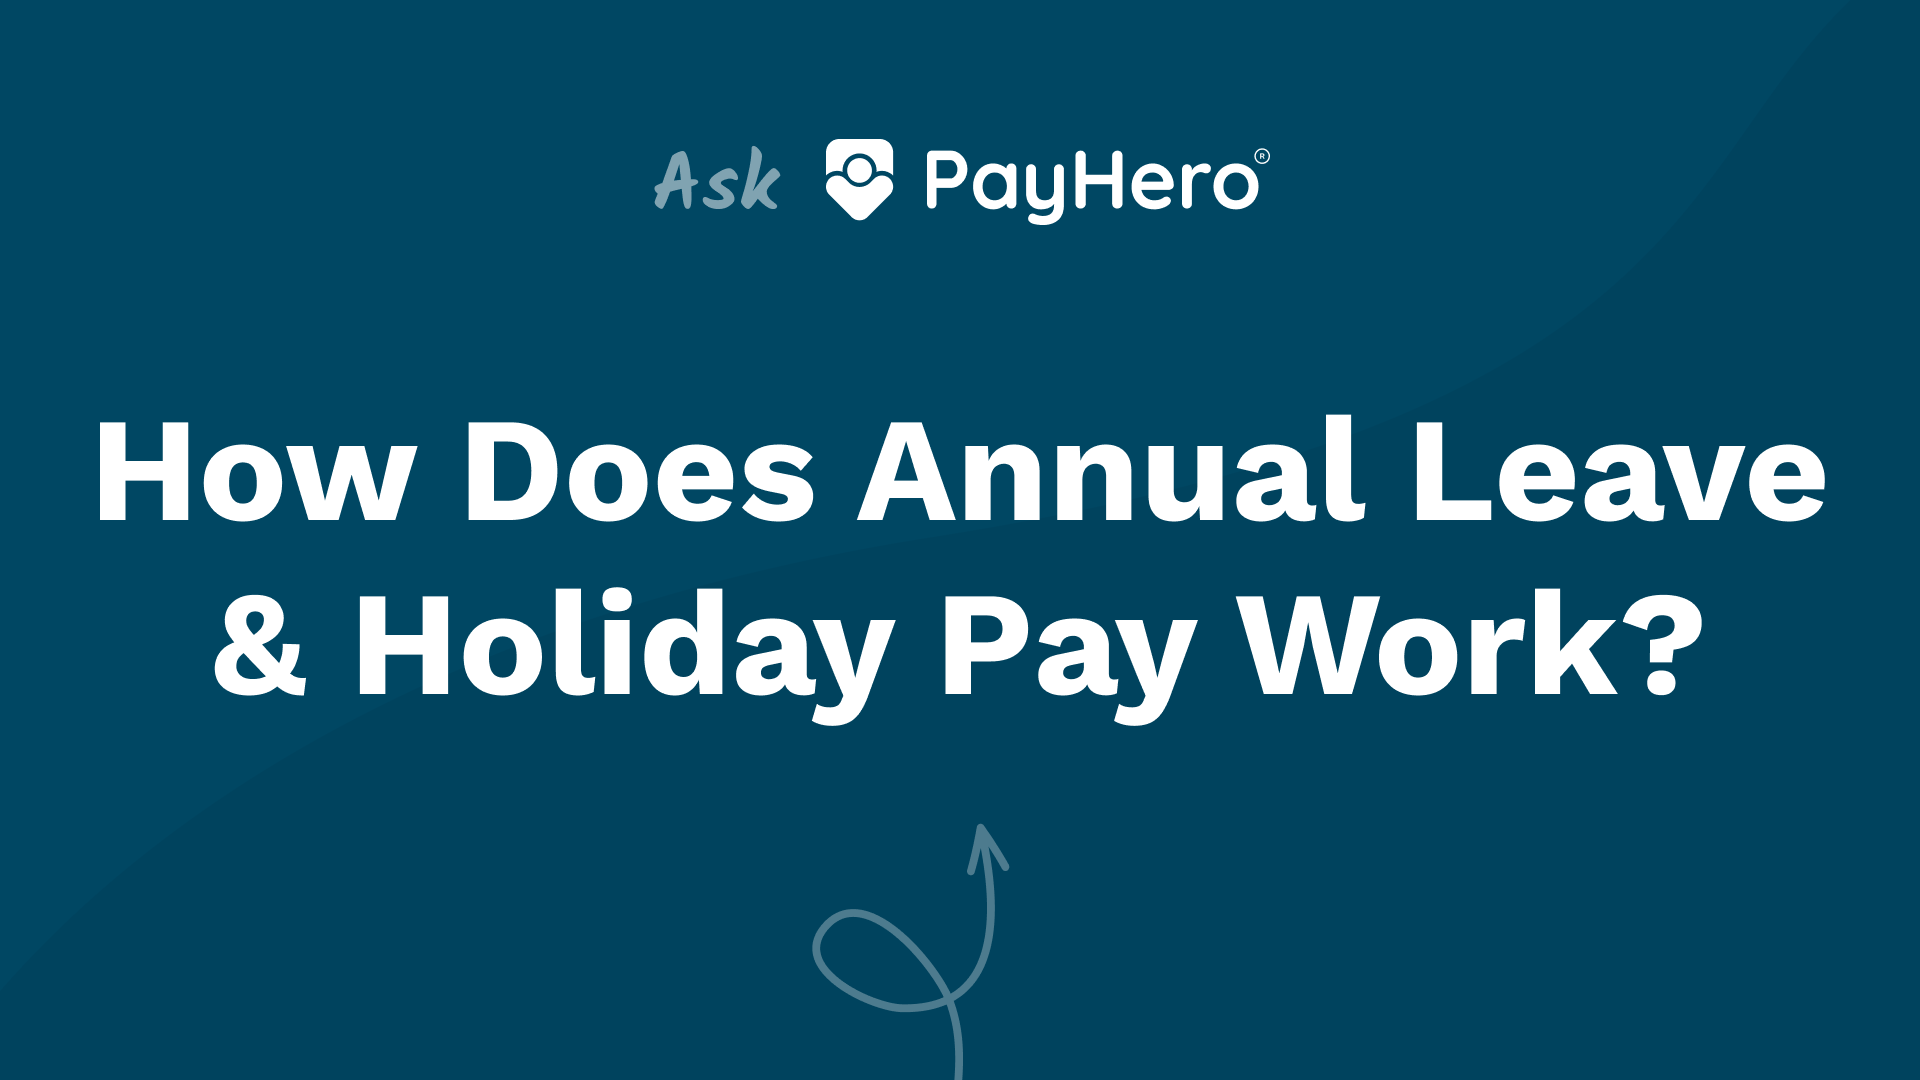 How does annual leave & holiday pay work? | PayHero Video Guide